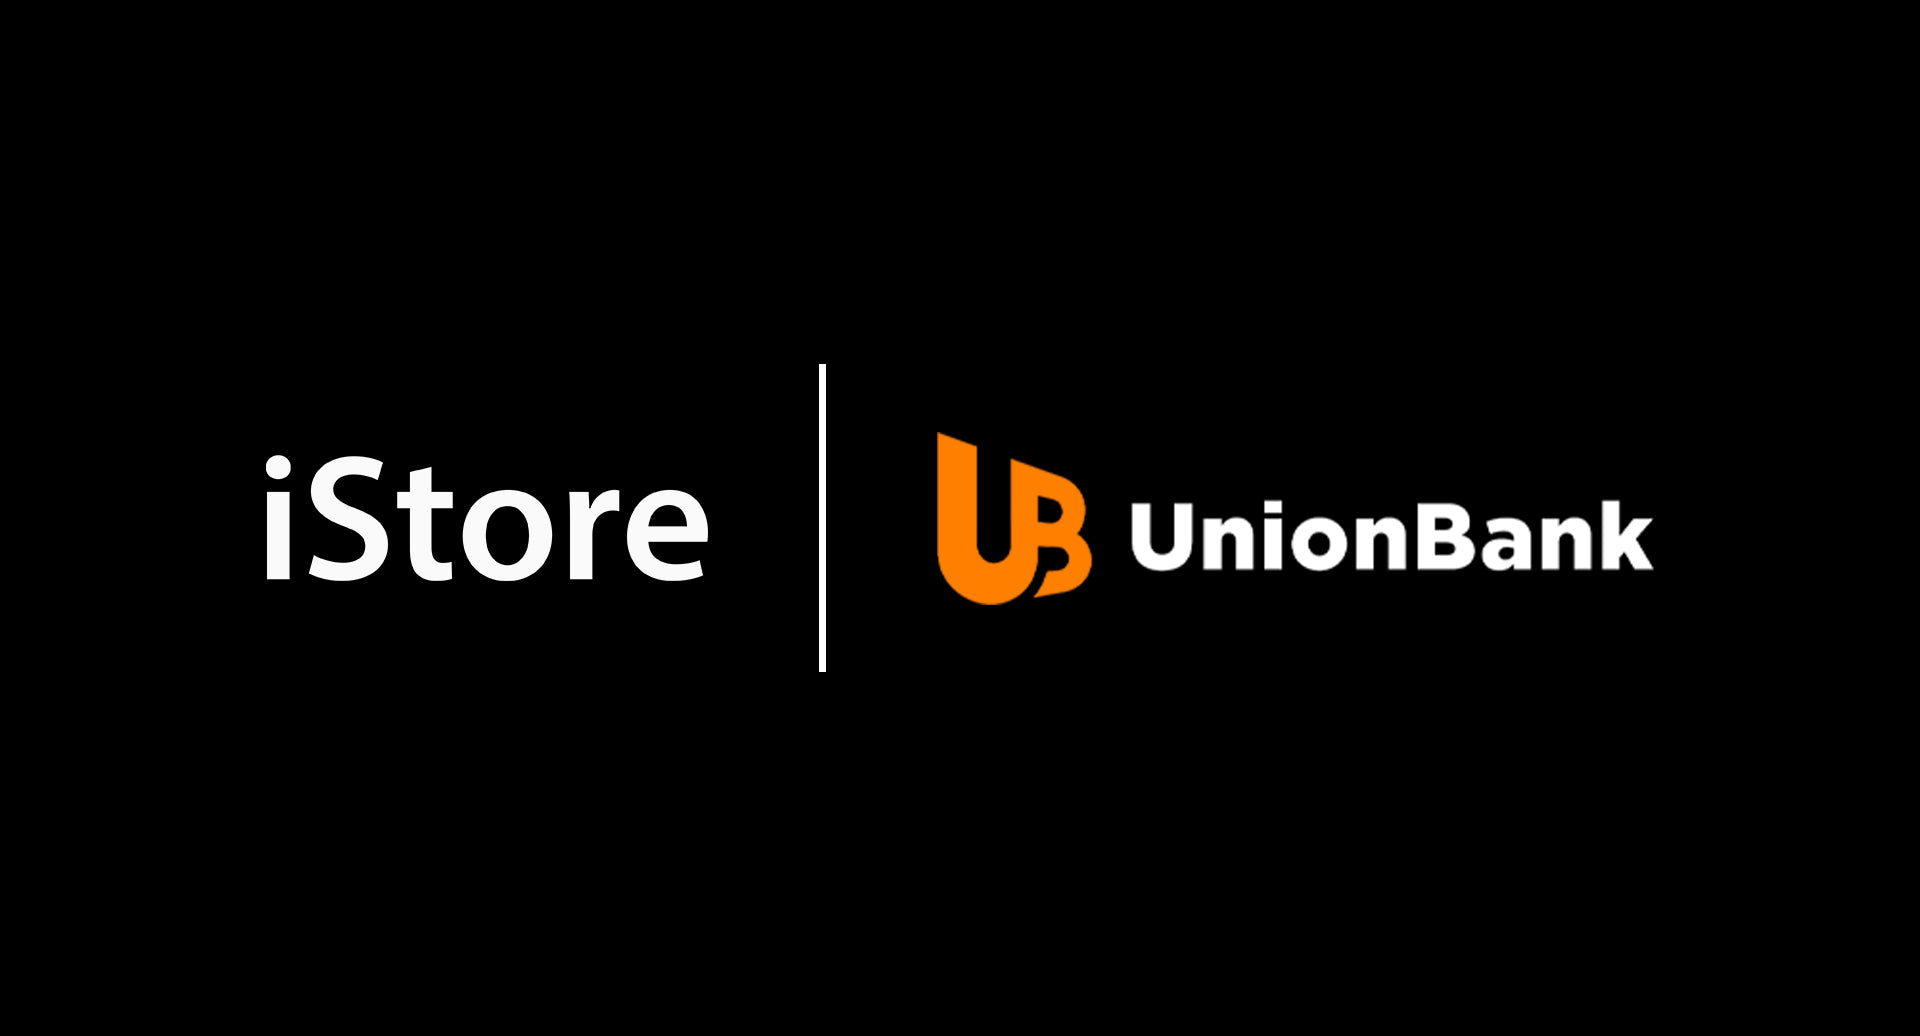 iStore ties up with UnionBank for special offers